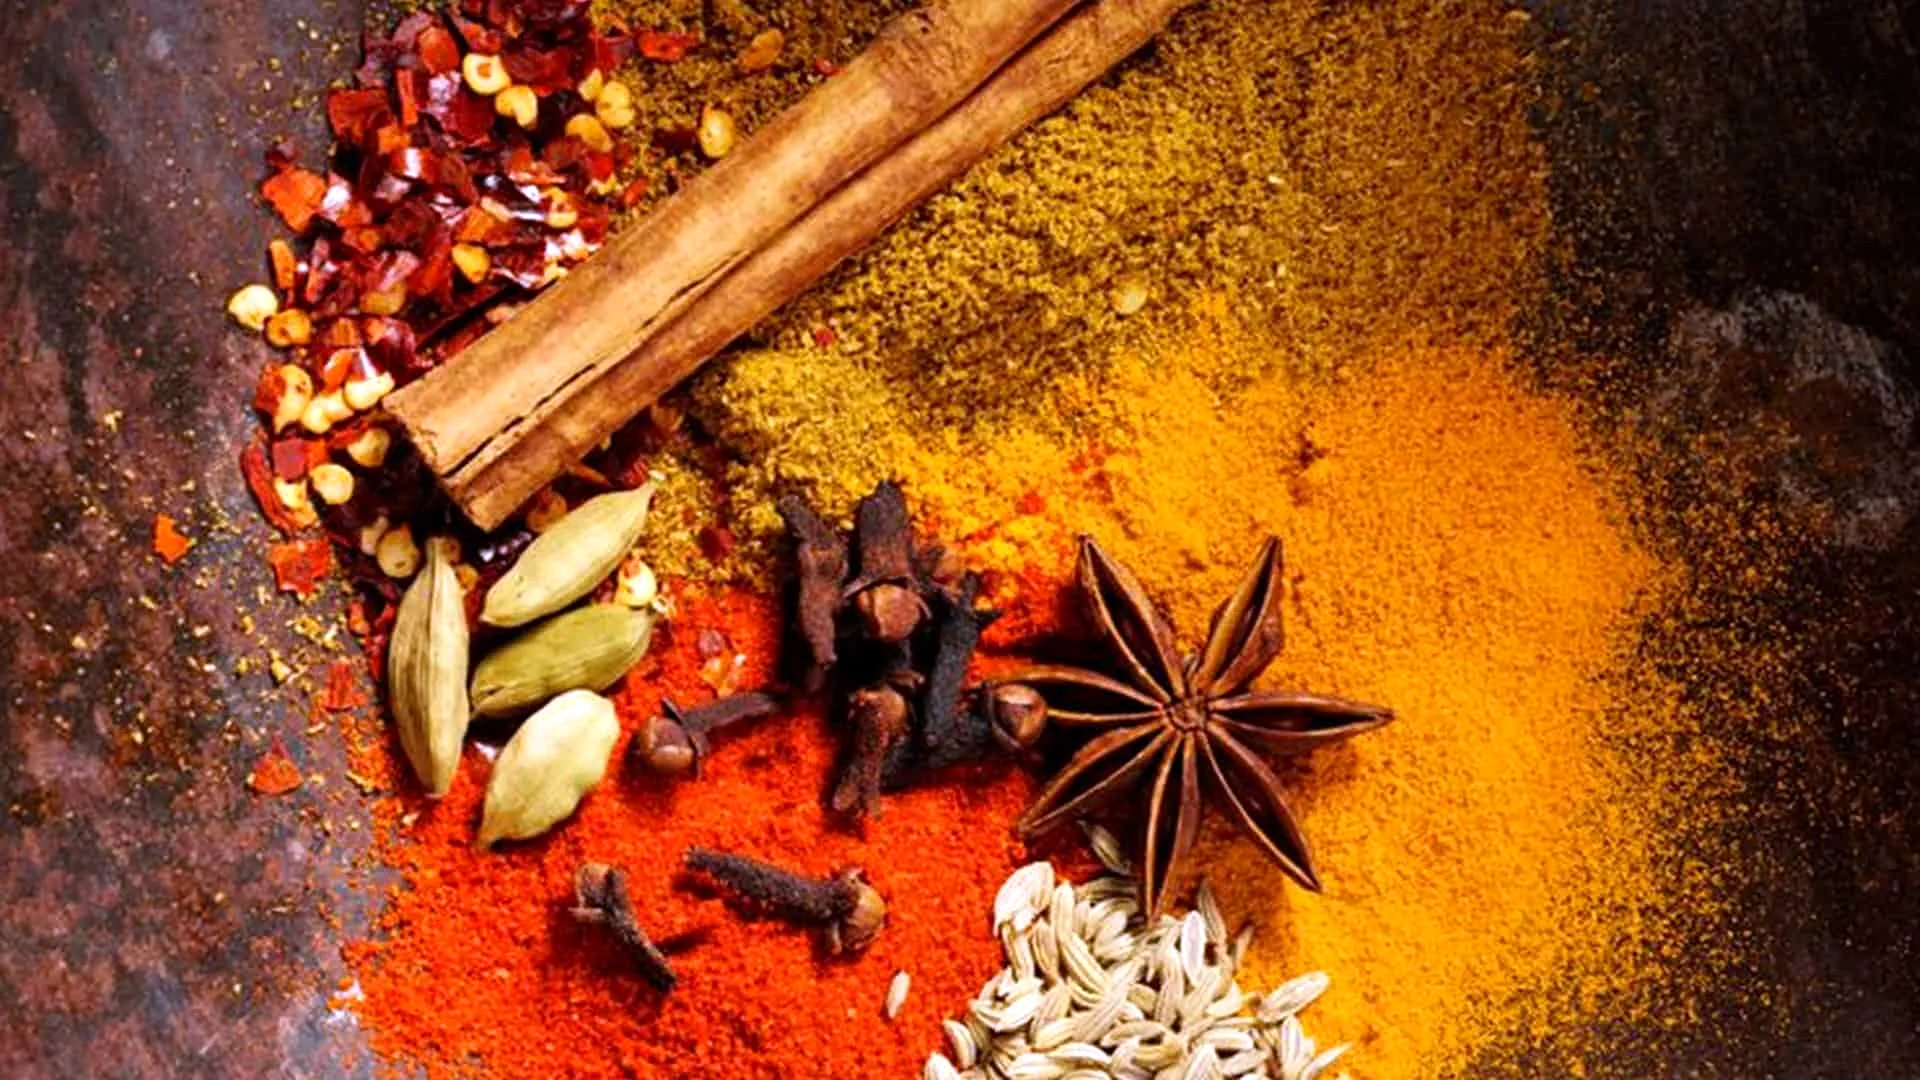 Spices Wallpaper